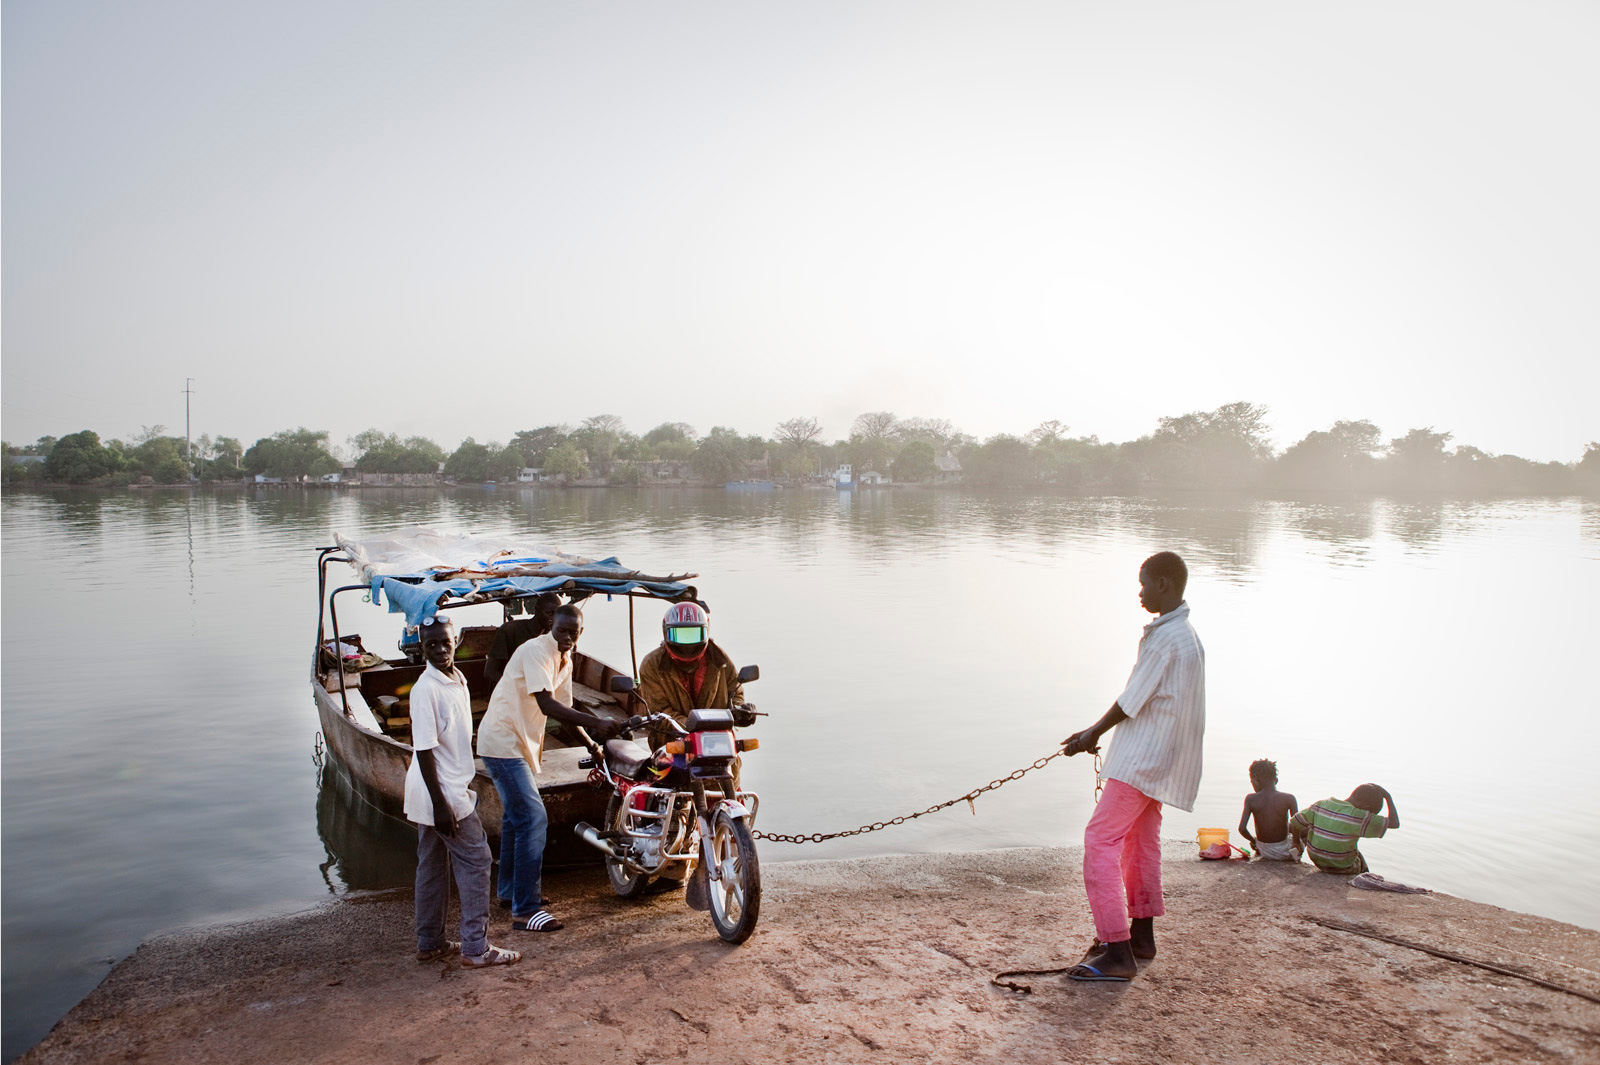 River Gambia - Photo by Jason Florio